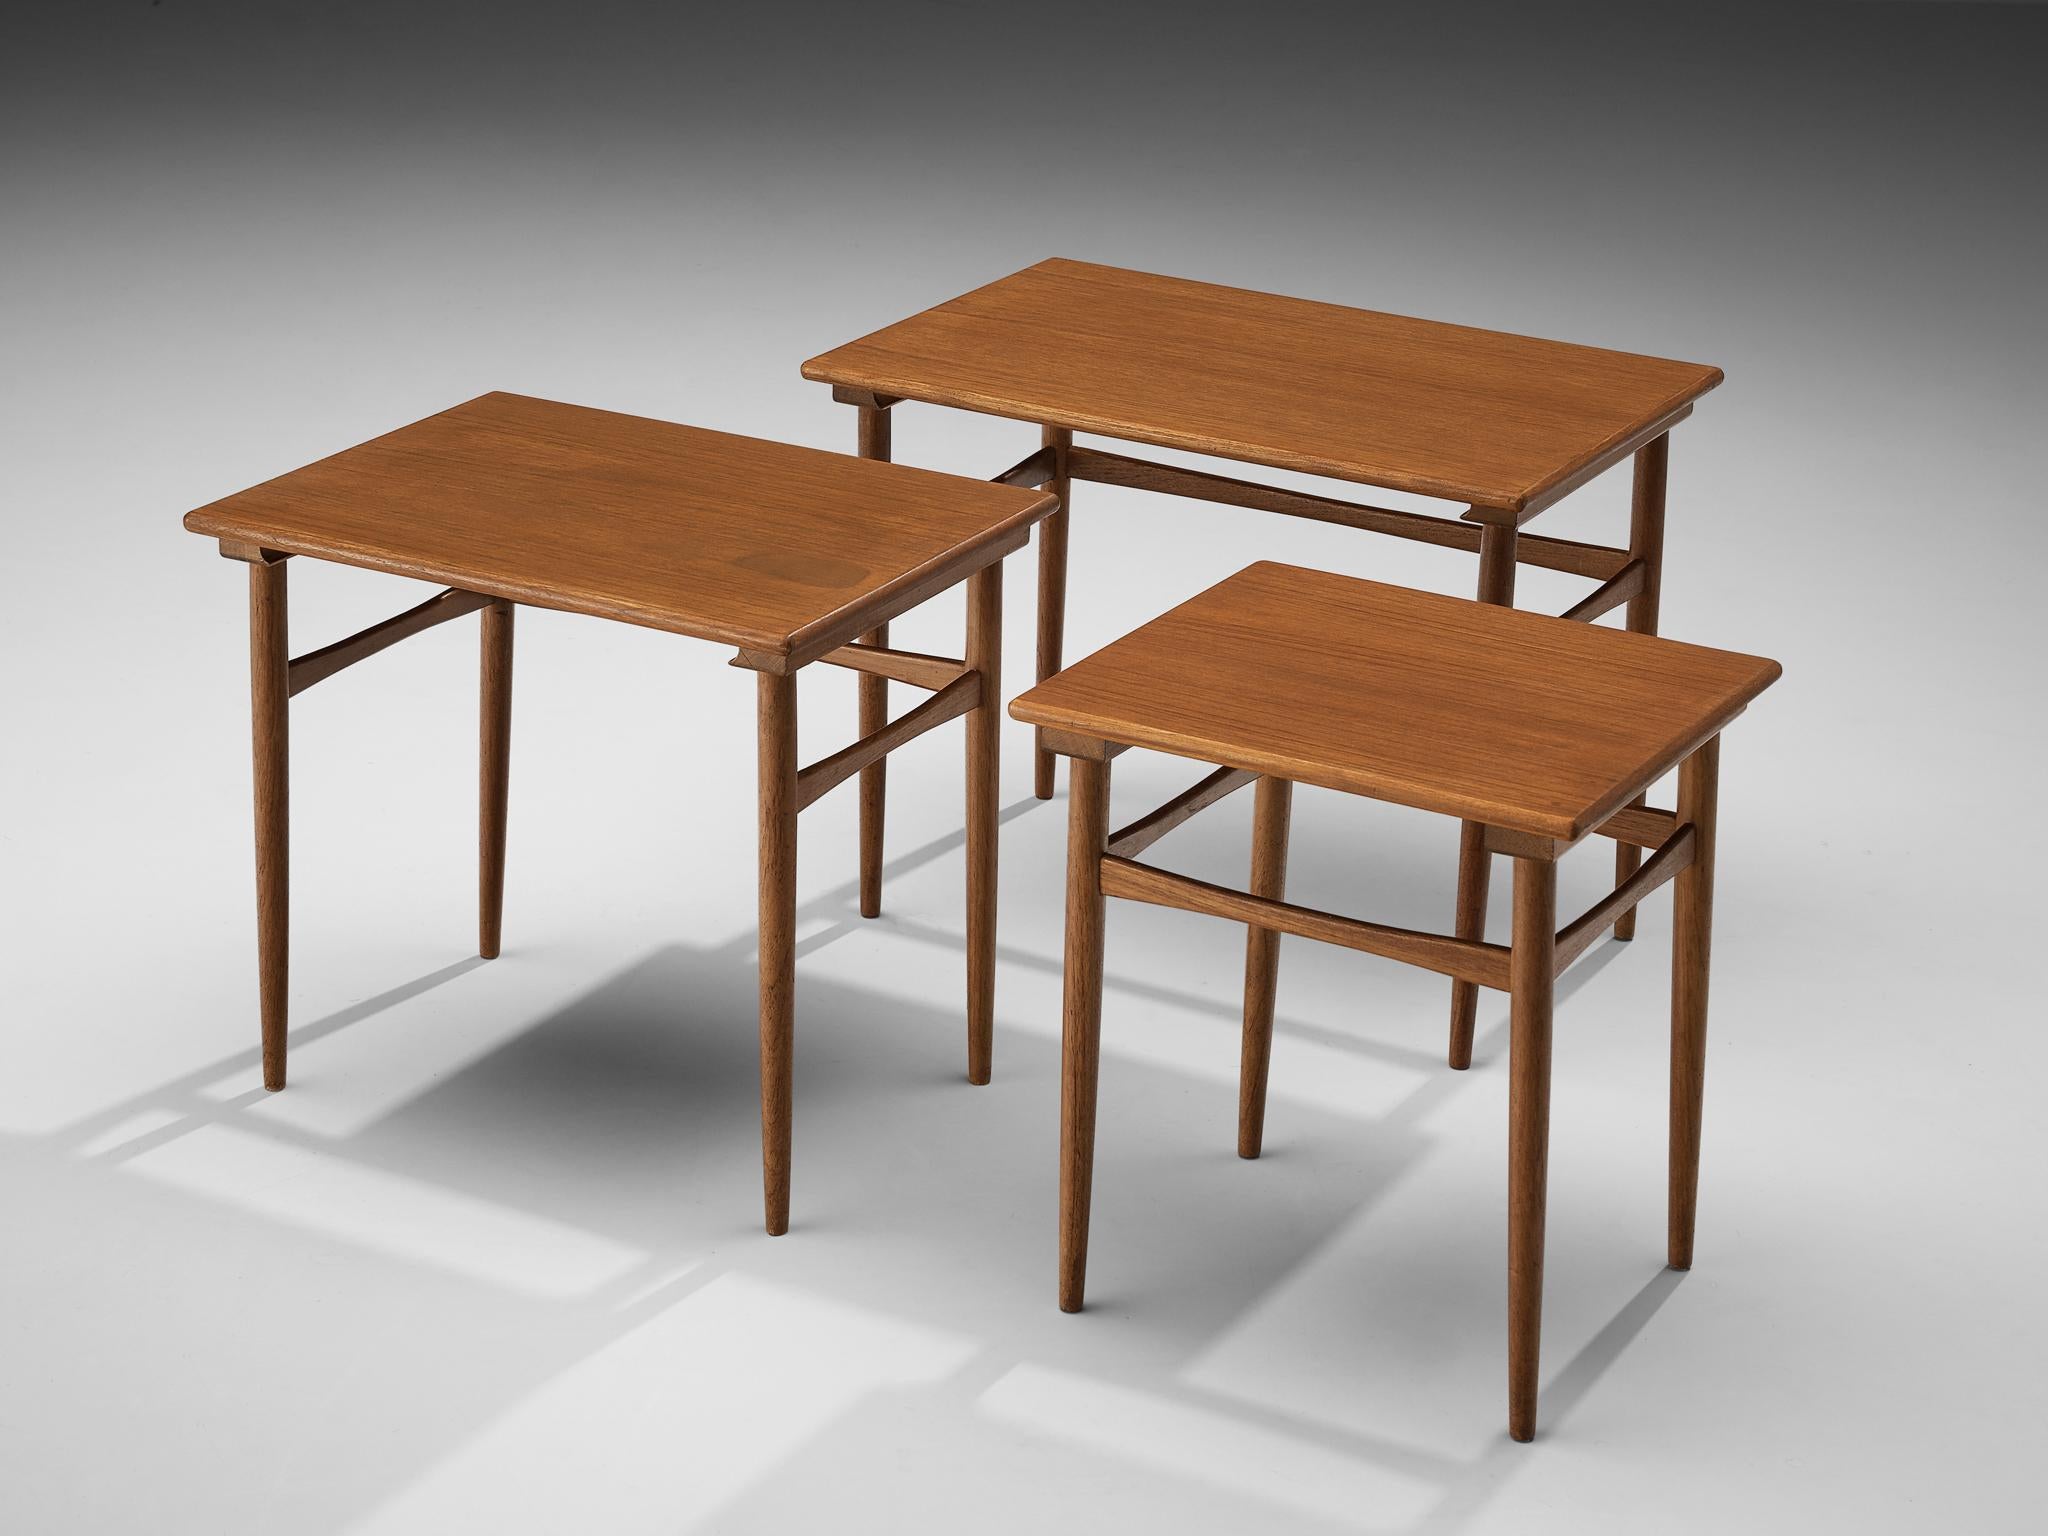 Set of three Danish nesting tables, teak, Denmark, 1950s.

Danish set of three nesting tables executed in teak. The three tables not only differ in their height but also in the format of the tops. Whereas the tallest table has a rectangular format,